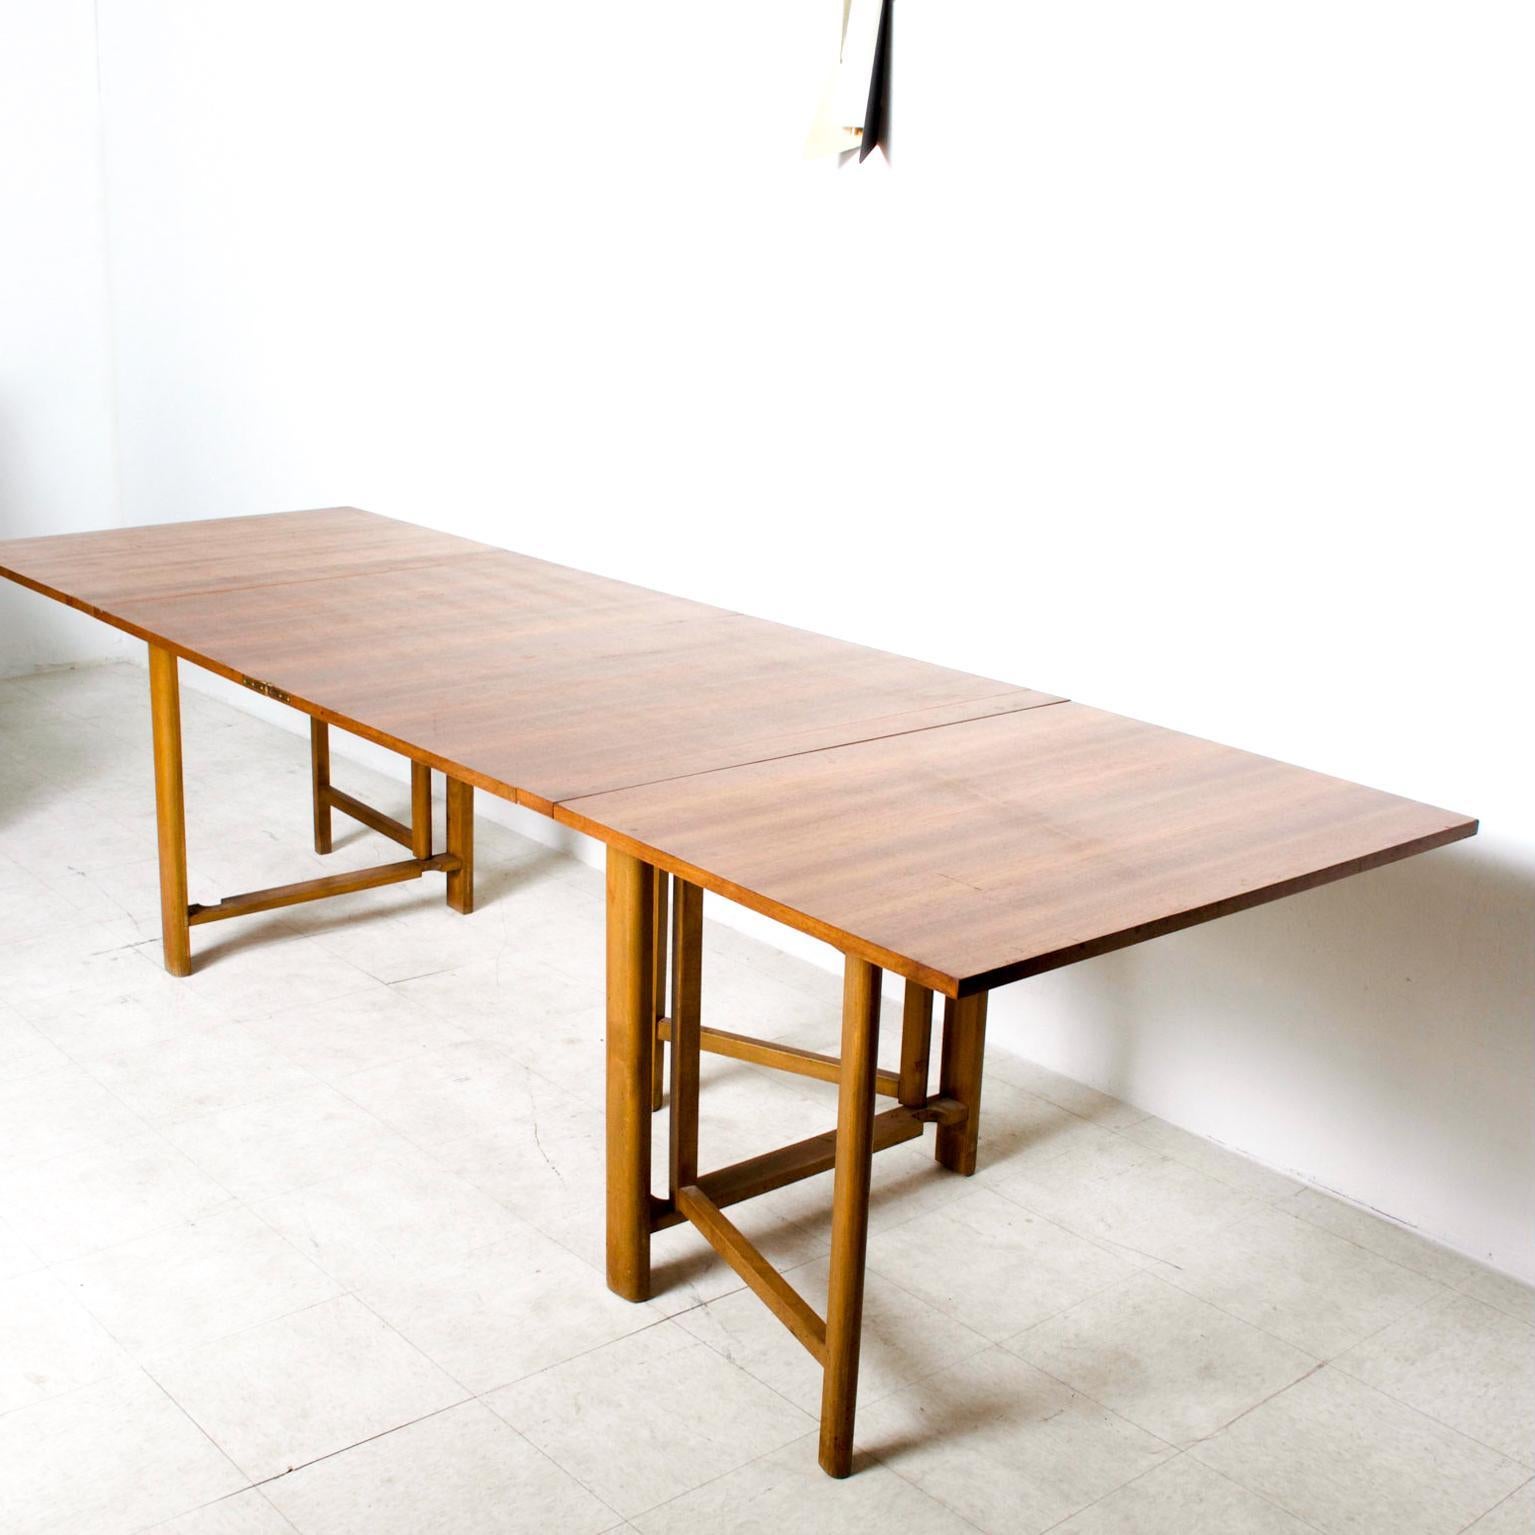 We are pleased to offer for your consideration a Maria Table in Teak. Made in Denmark. By Bruno Mathsson. The table can be folded into multiple configurations. 

Dimensions: 35 1/2